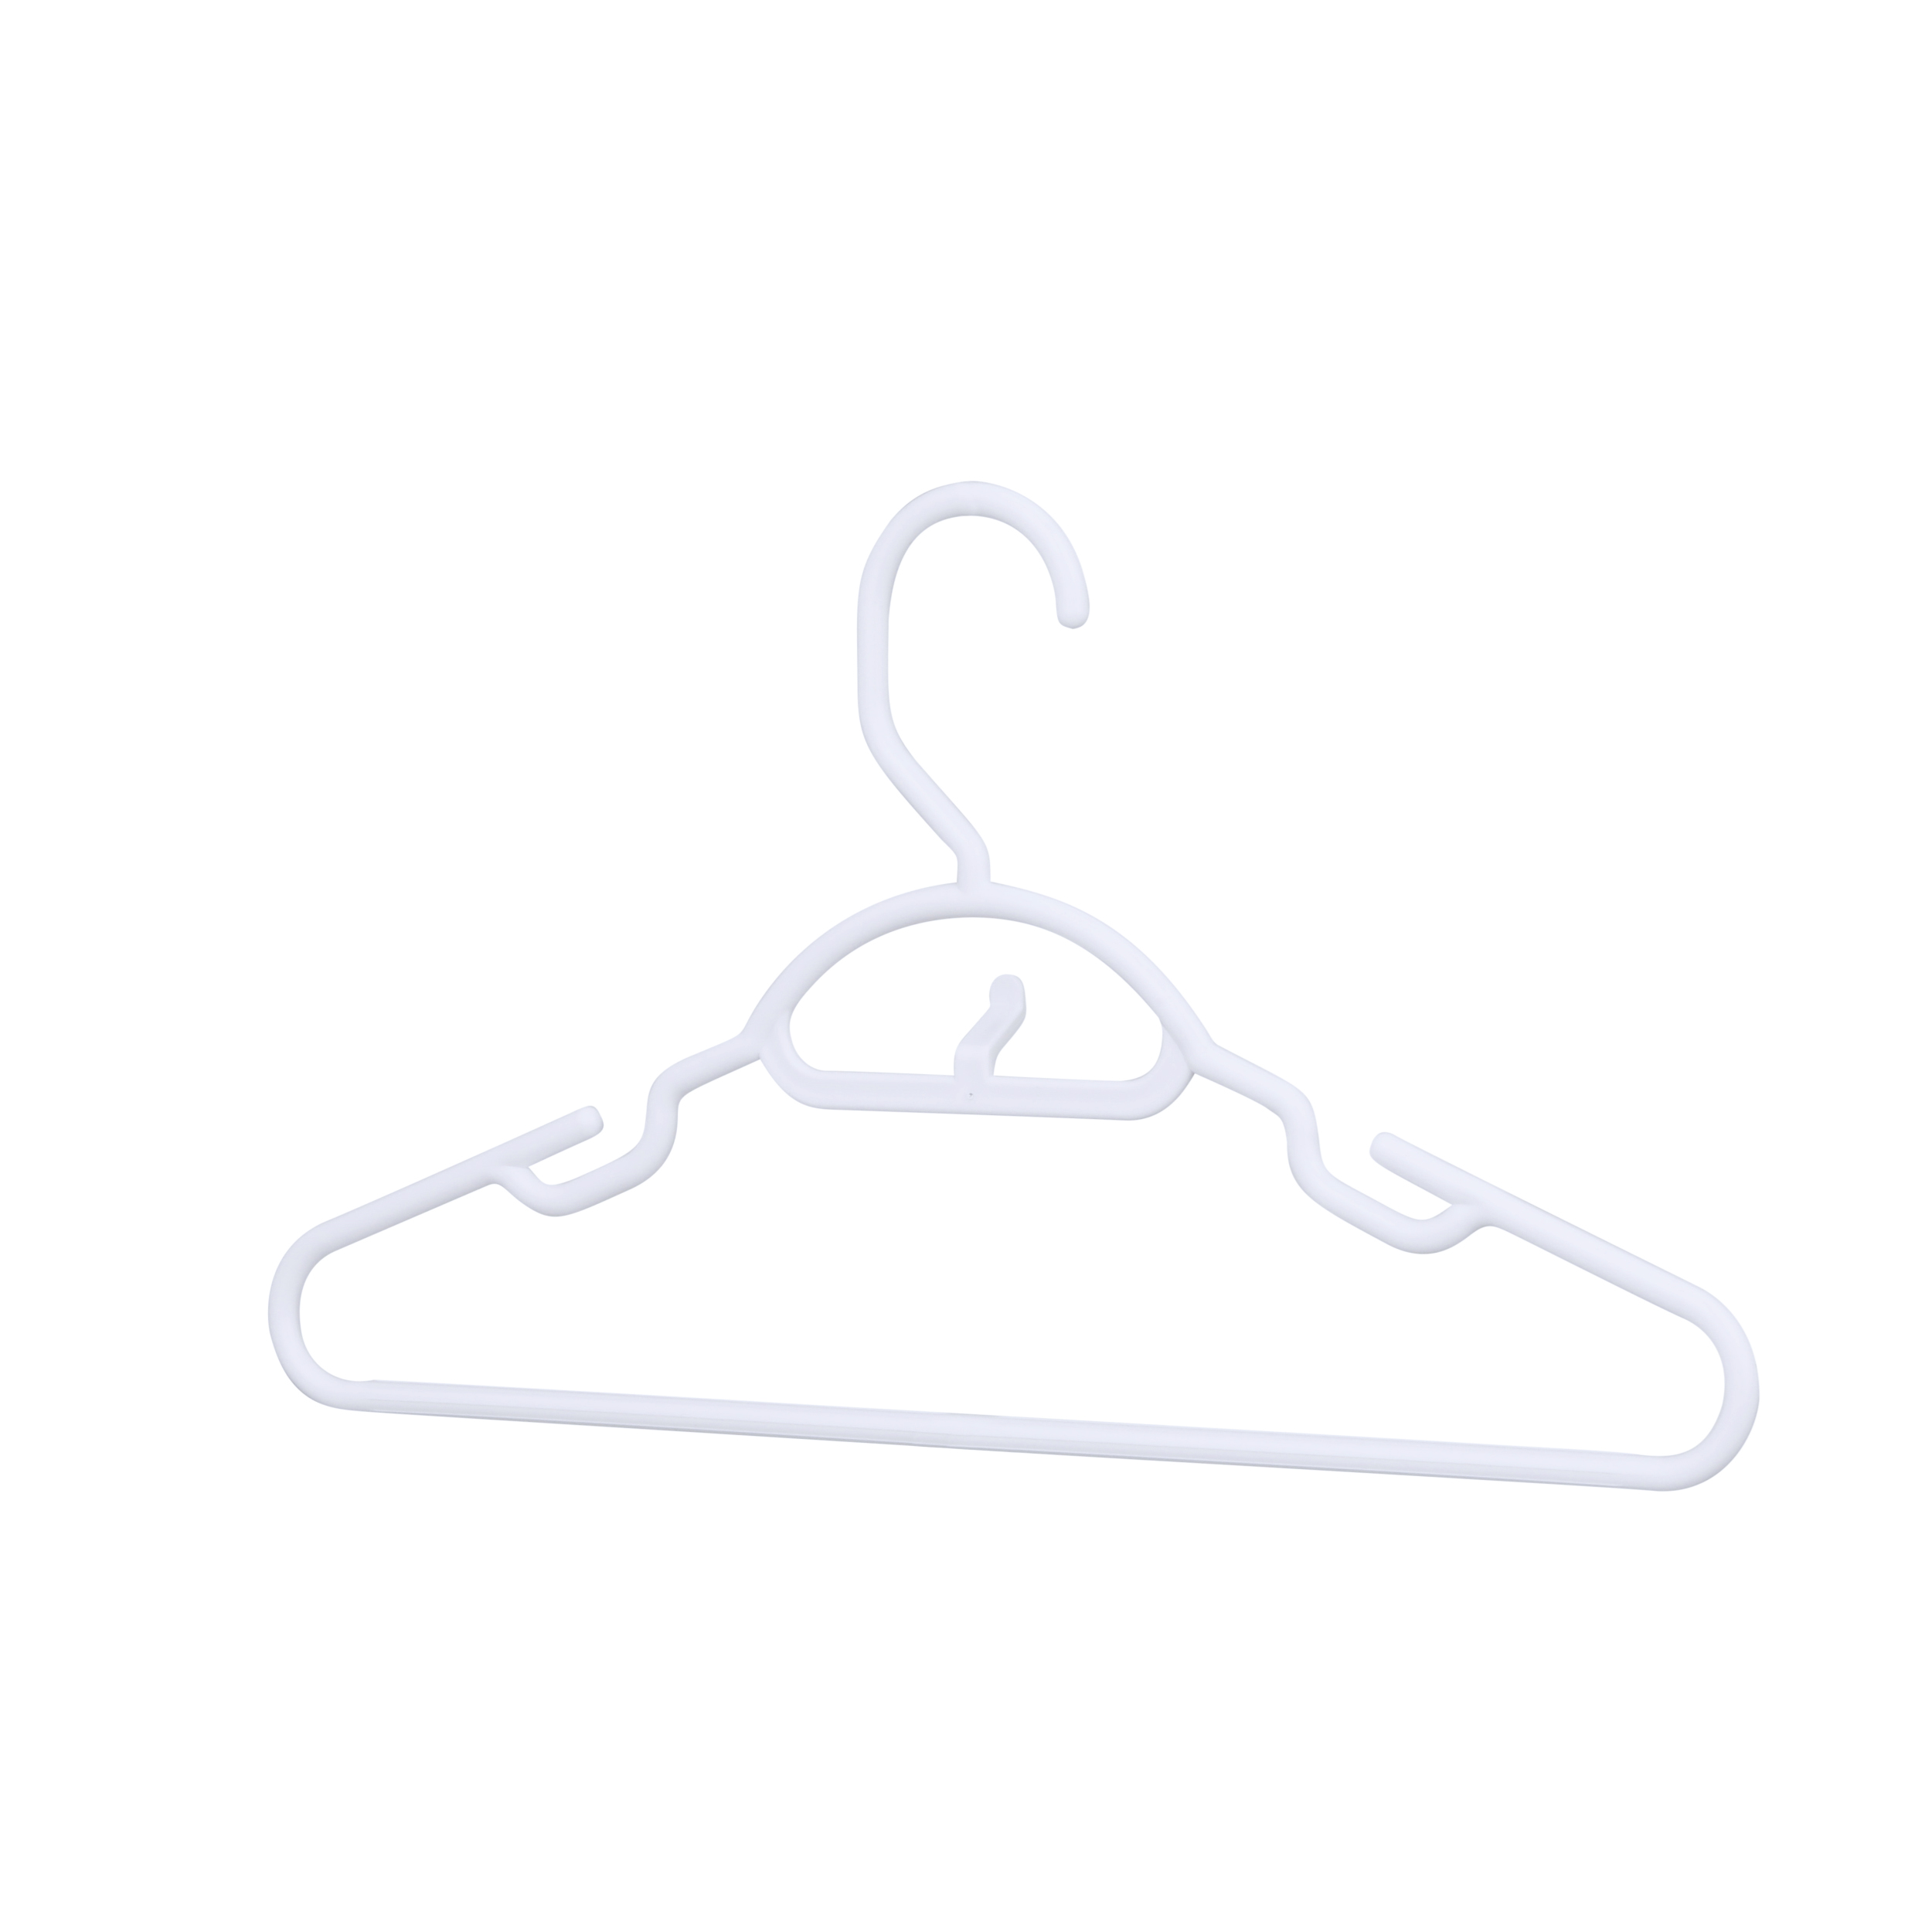 30 Pk Peach Youth Petite Plastic Hangers for Children Clothes Sizes 8 to 14, Petite, Teen, Preteen, Junior, 30 Pack (peach)